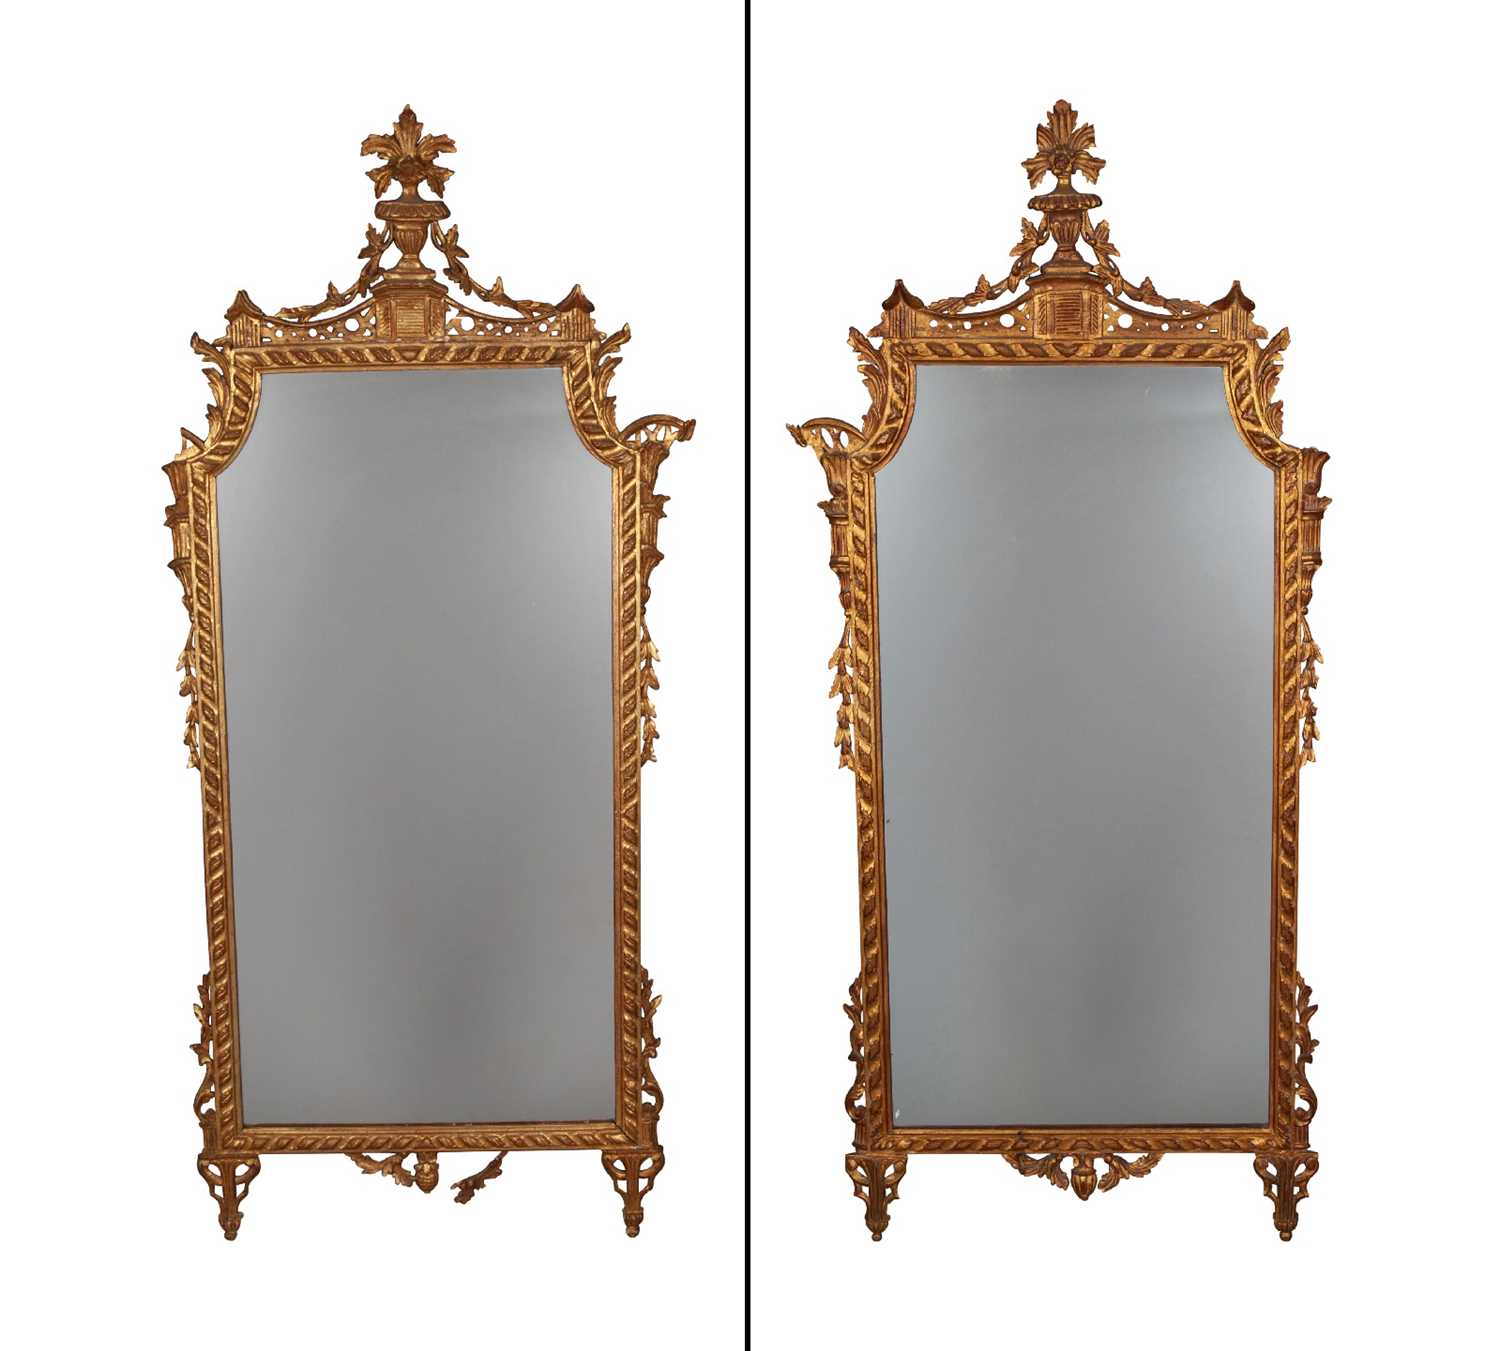 Lot 318 - Pair of George III Style Giltwood Mirrors